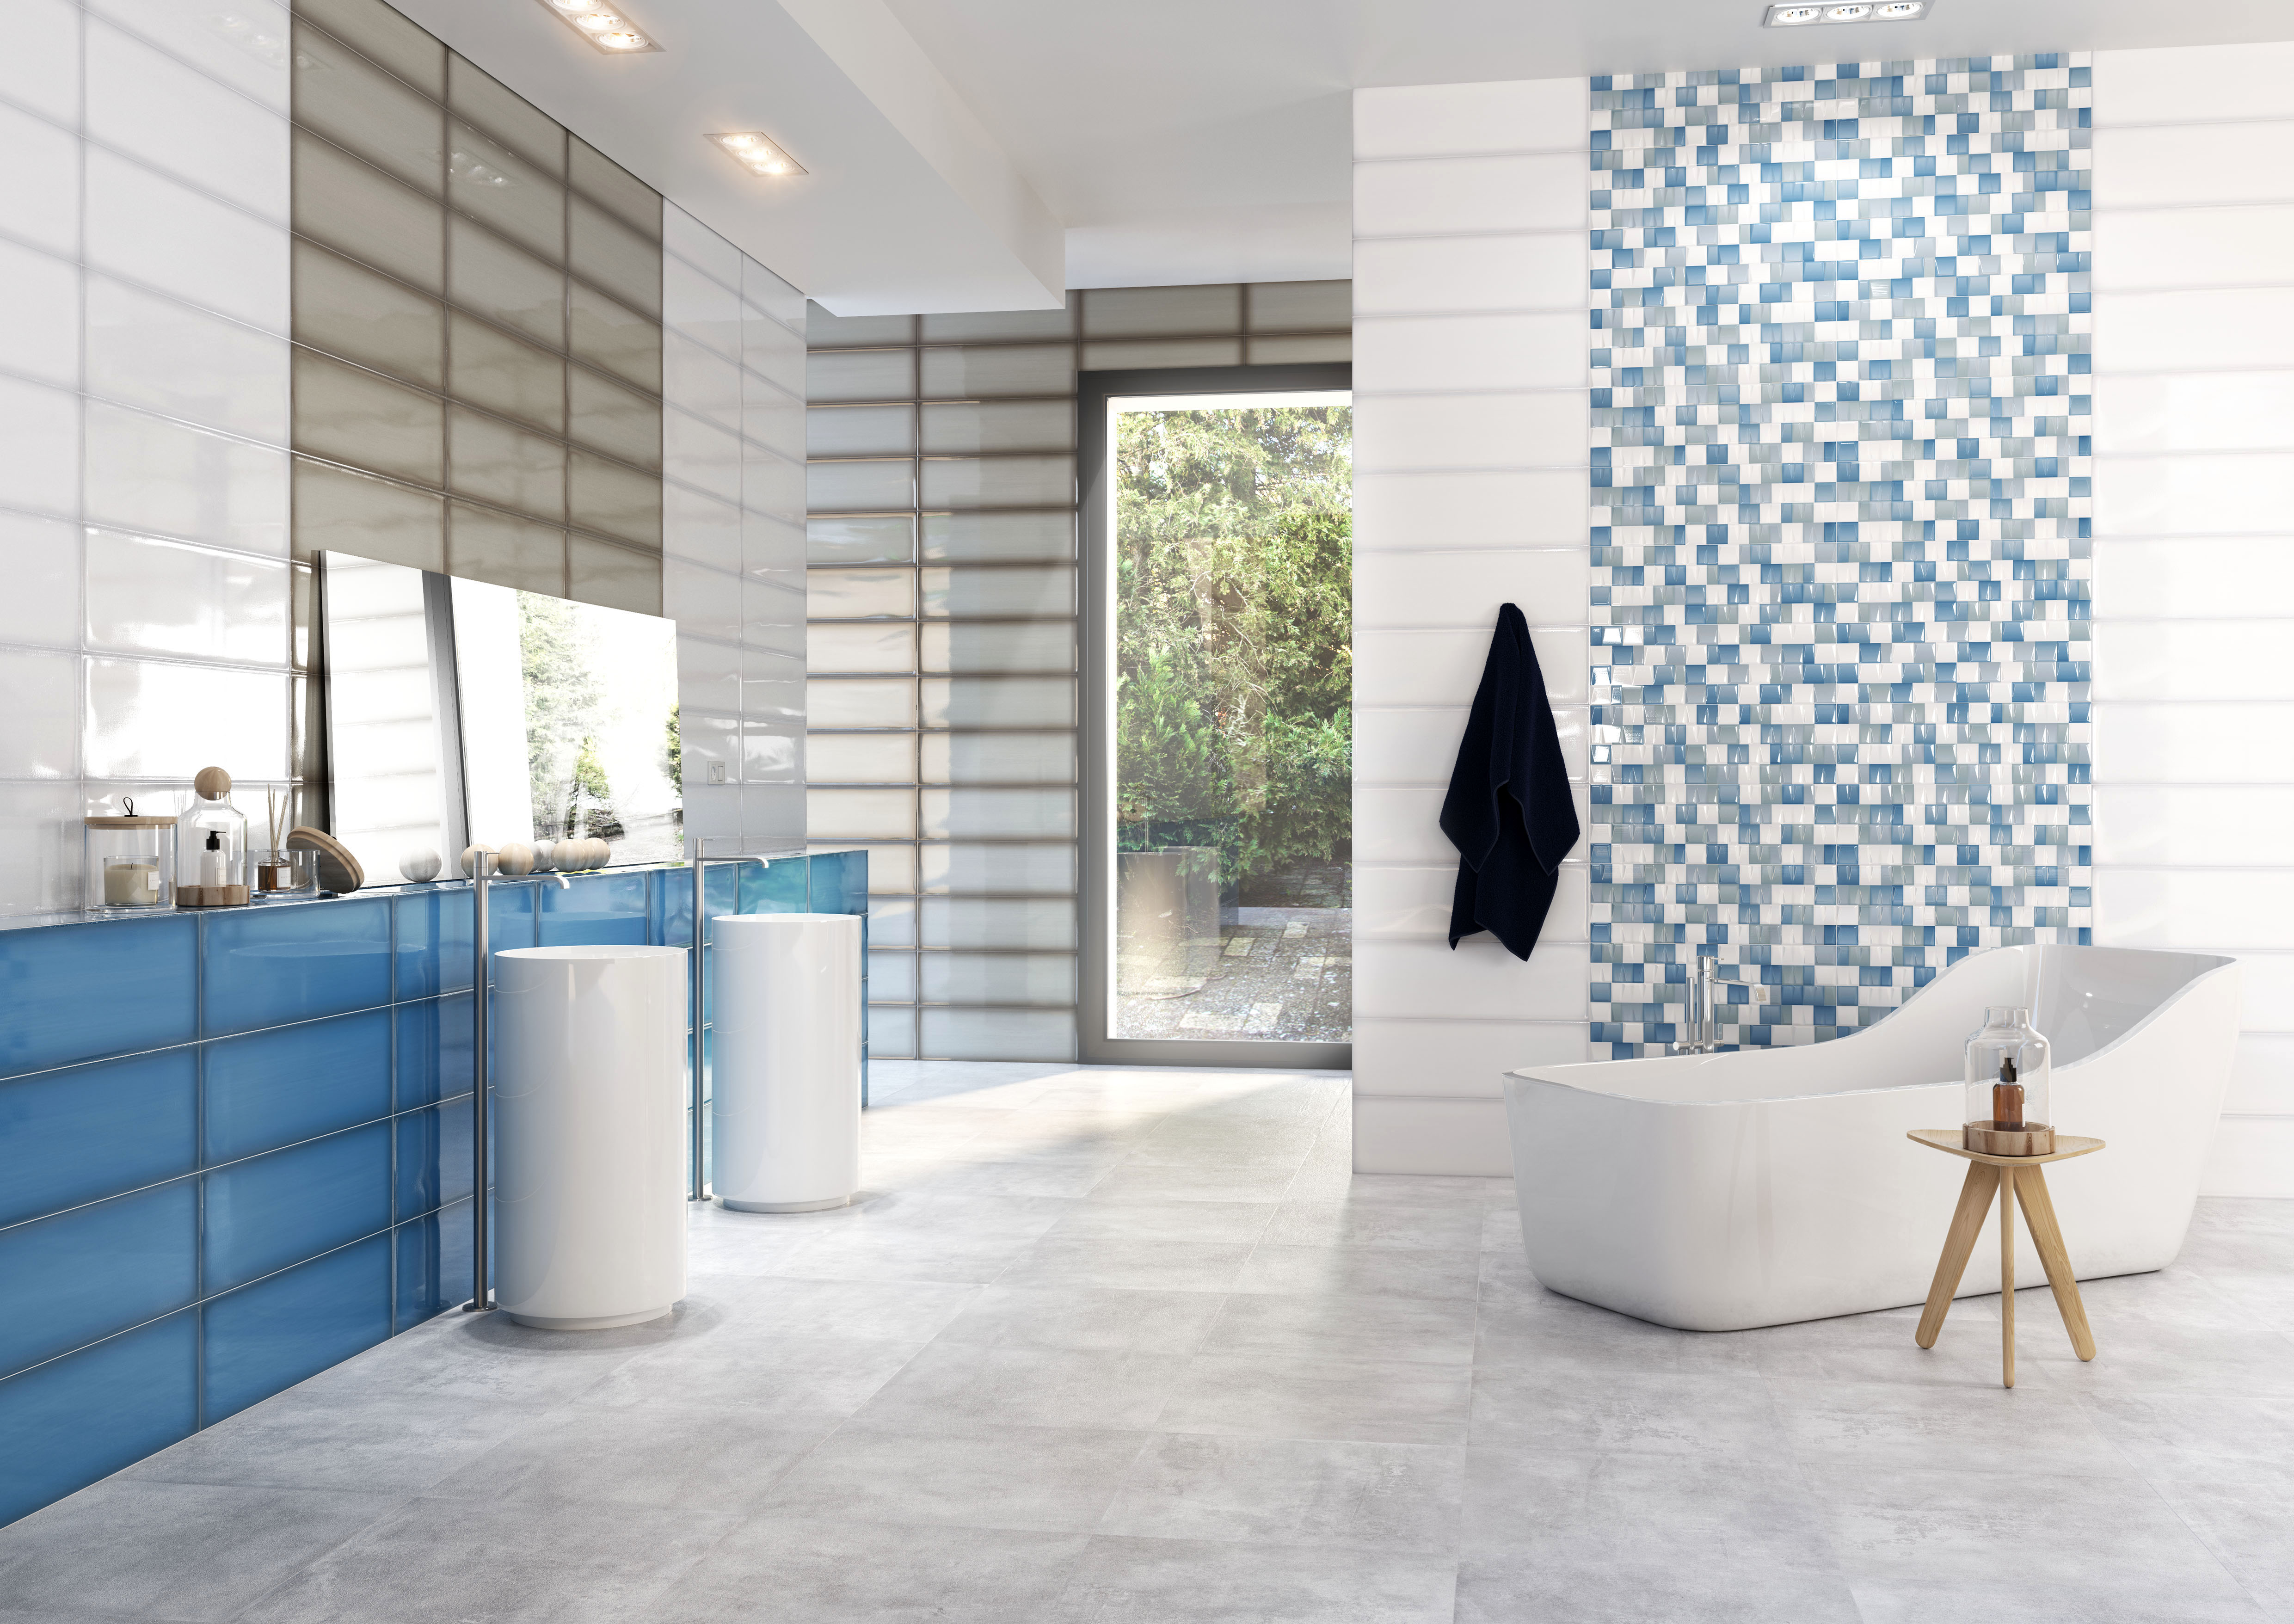 Modern bathroom with pale tile floor, shades of light blue and white, tiled white walls, blue cabinetry